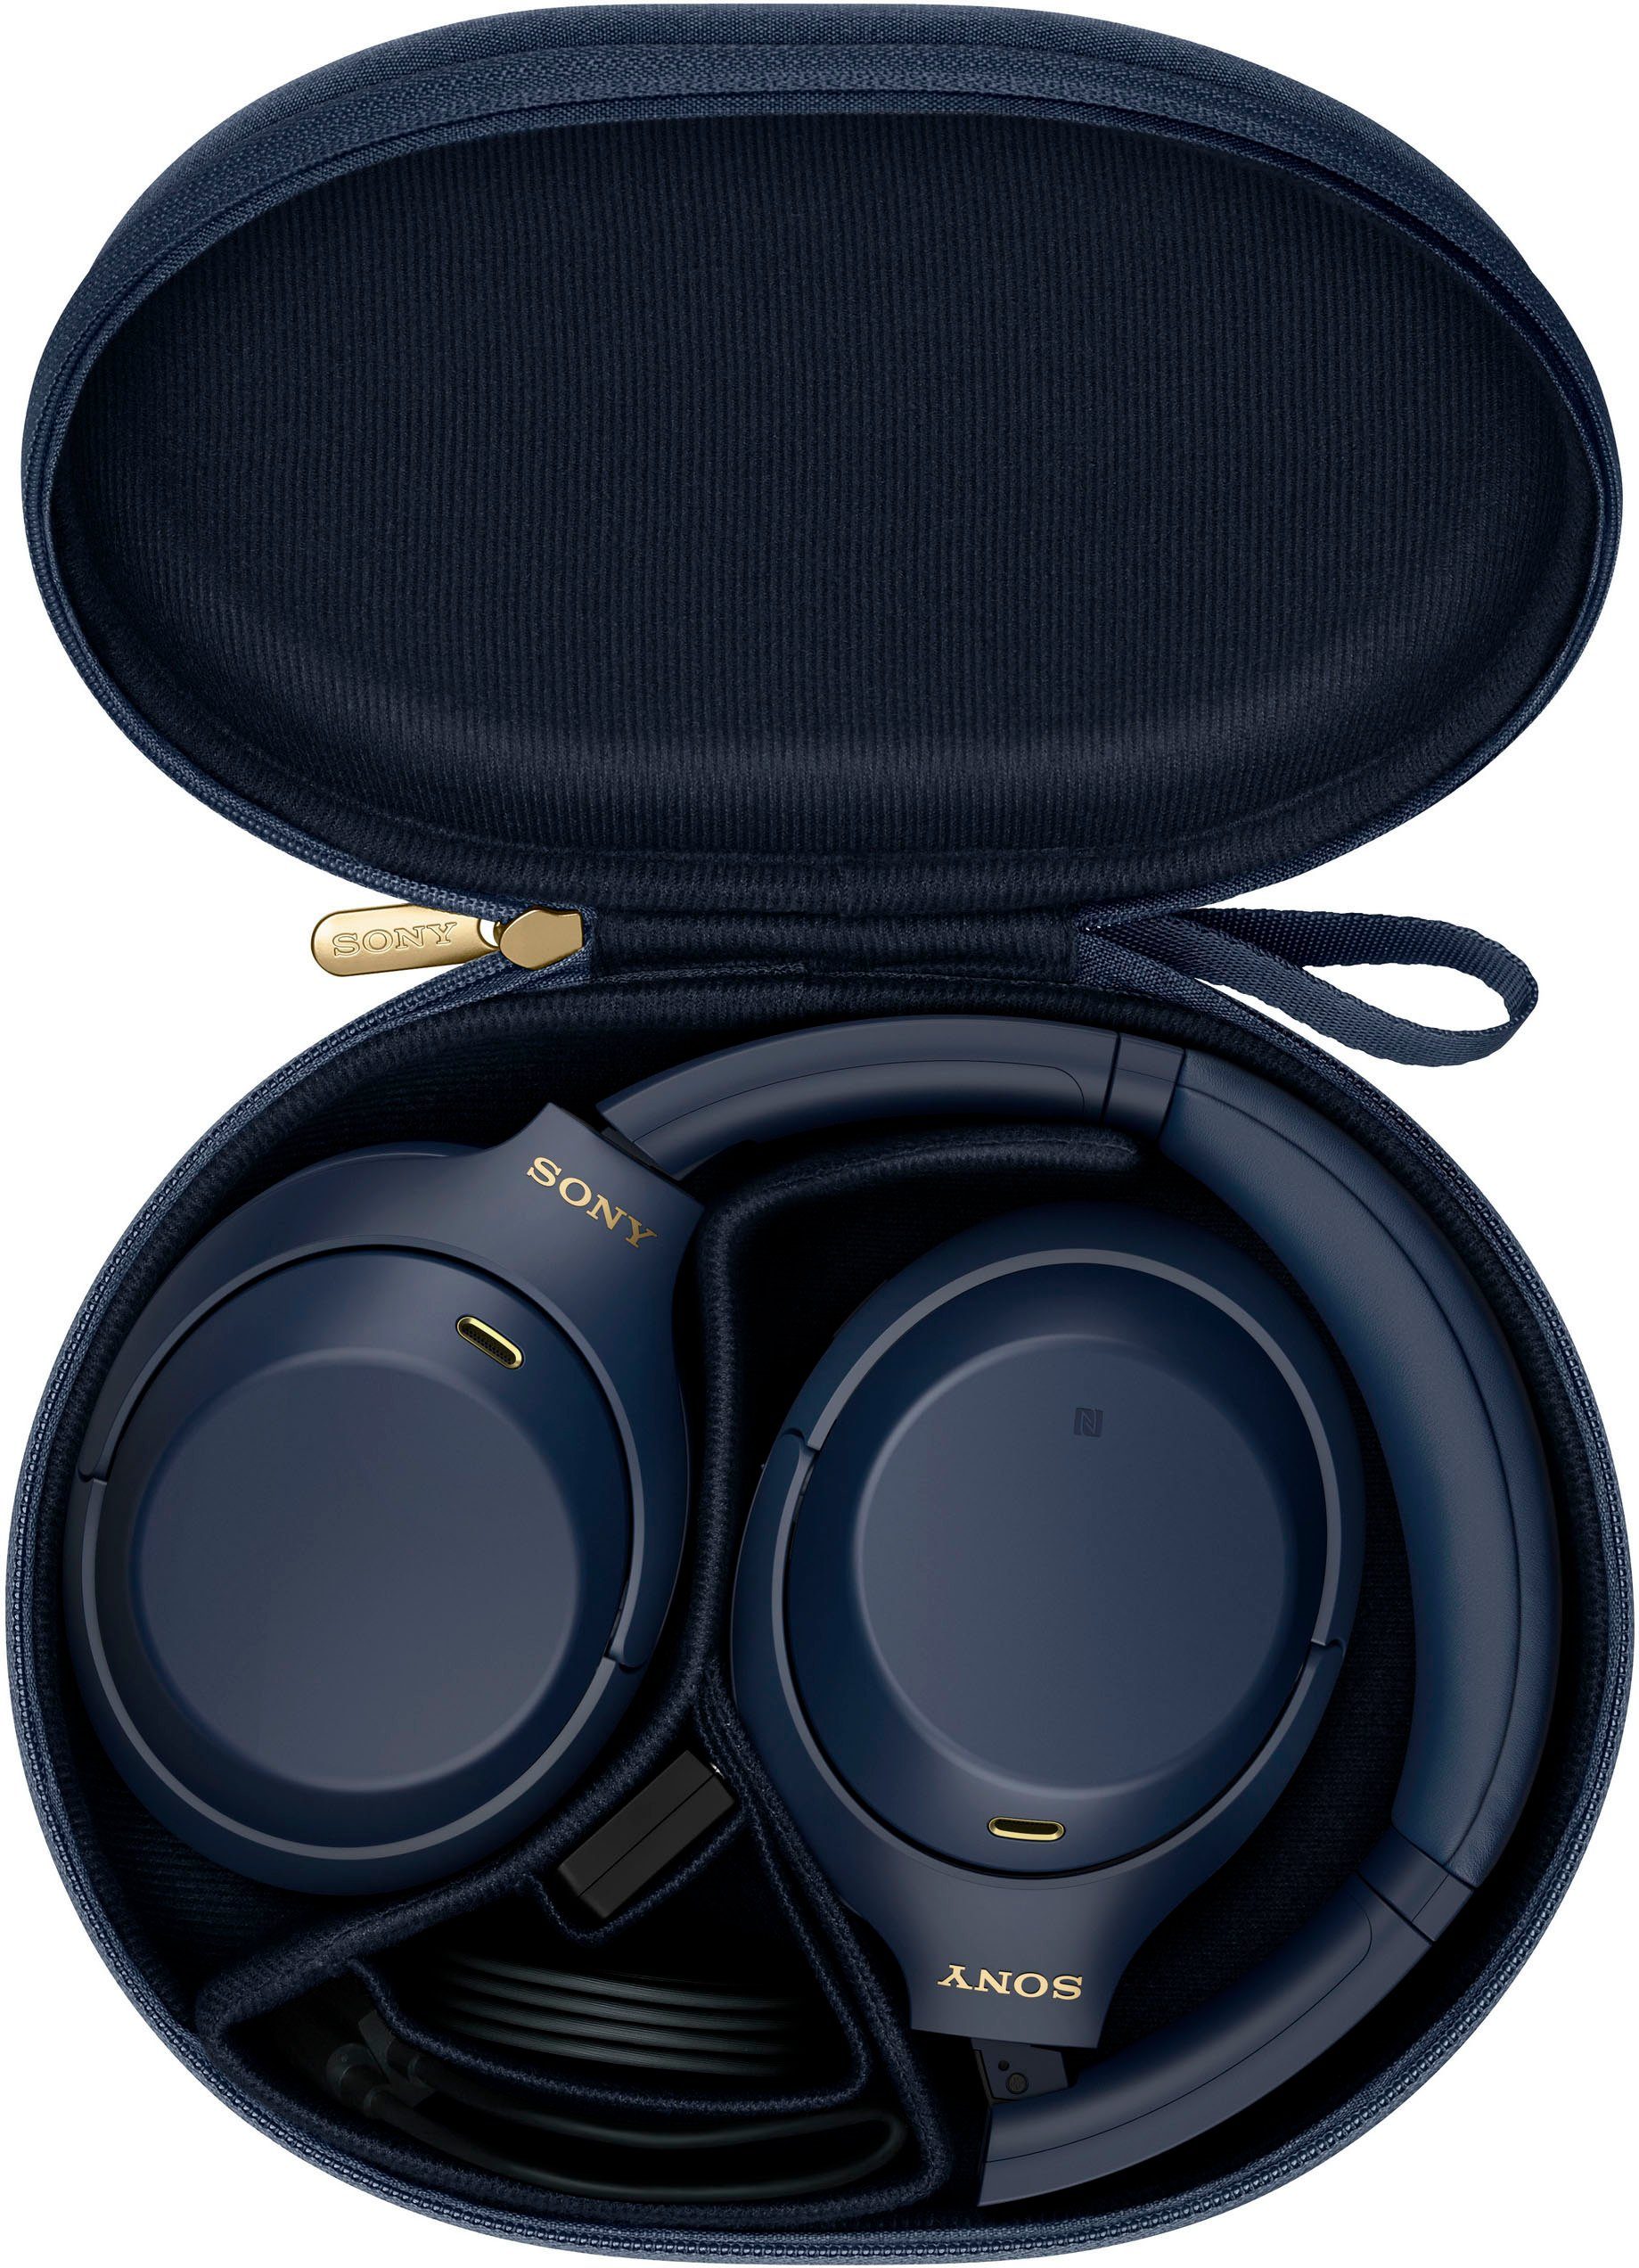 WH-1000XM4 NFC, Sony kabelloser Bluetooth, Touch Verbindung One-Touch Sensor, blau Over-Ear-Kopfhörer (Noise-Cancelling, NFC, via Schnellladefunktion)